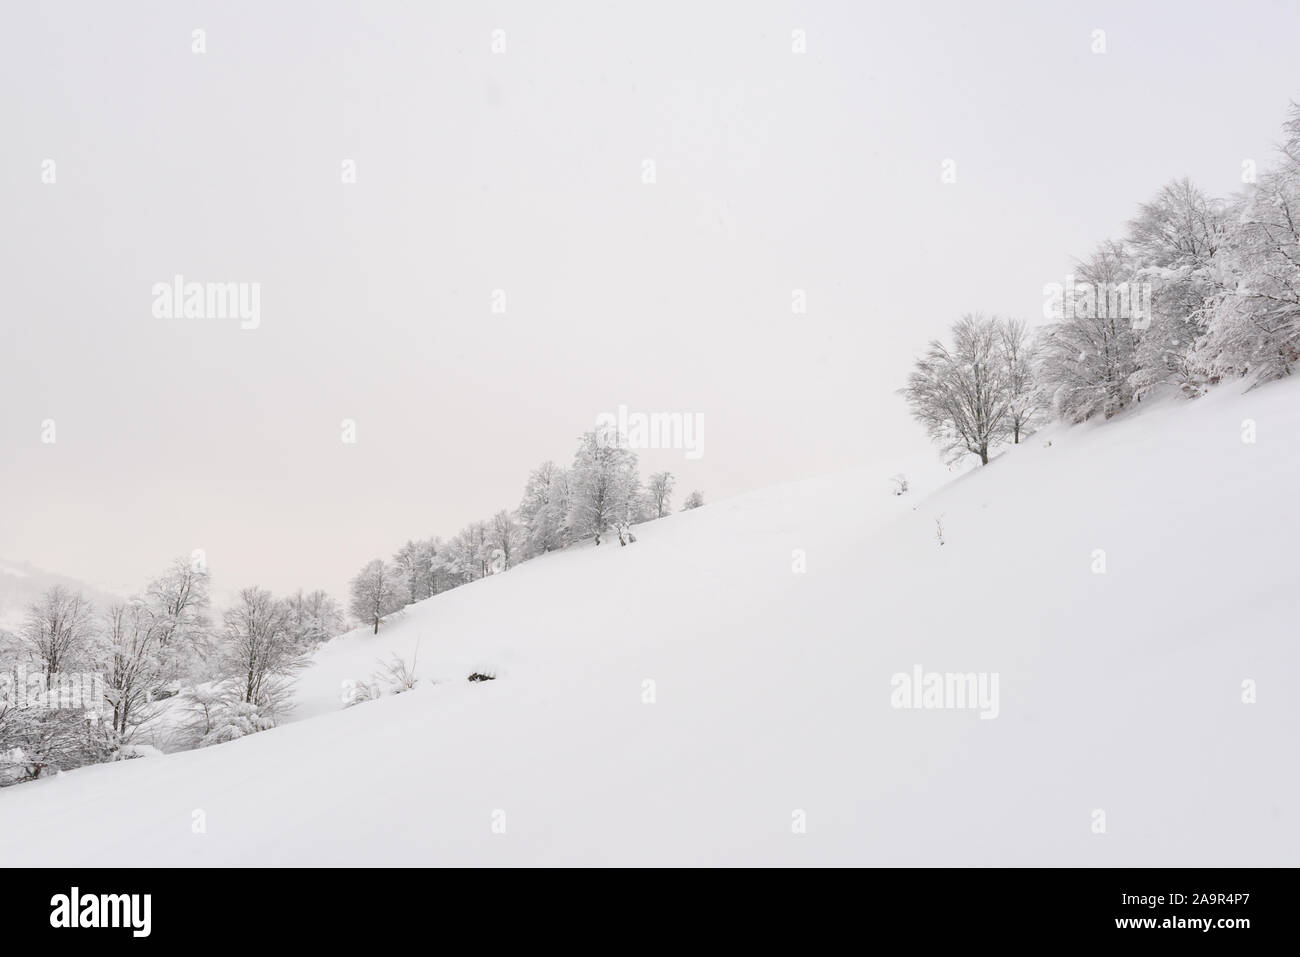 Minimalistic winter landscape in cloudy weather with snowy trees. Carpathian mountains, Landscape photography Stock Photo